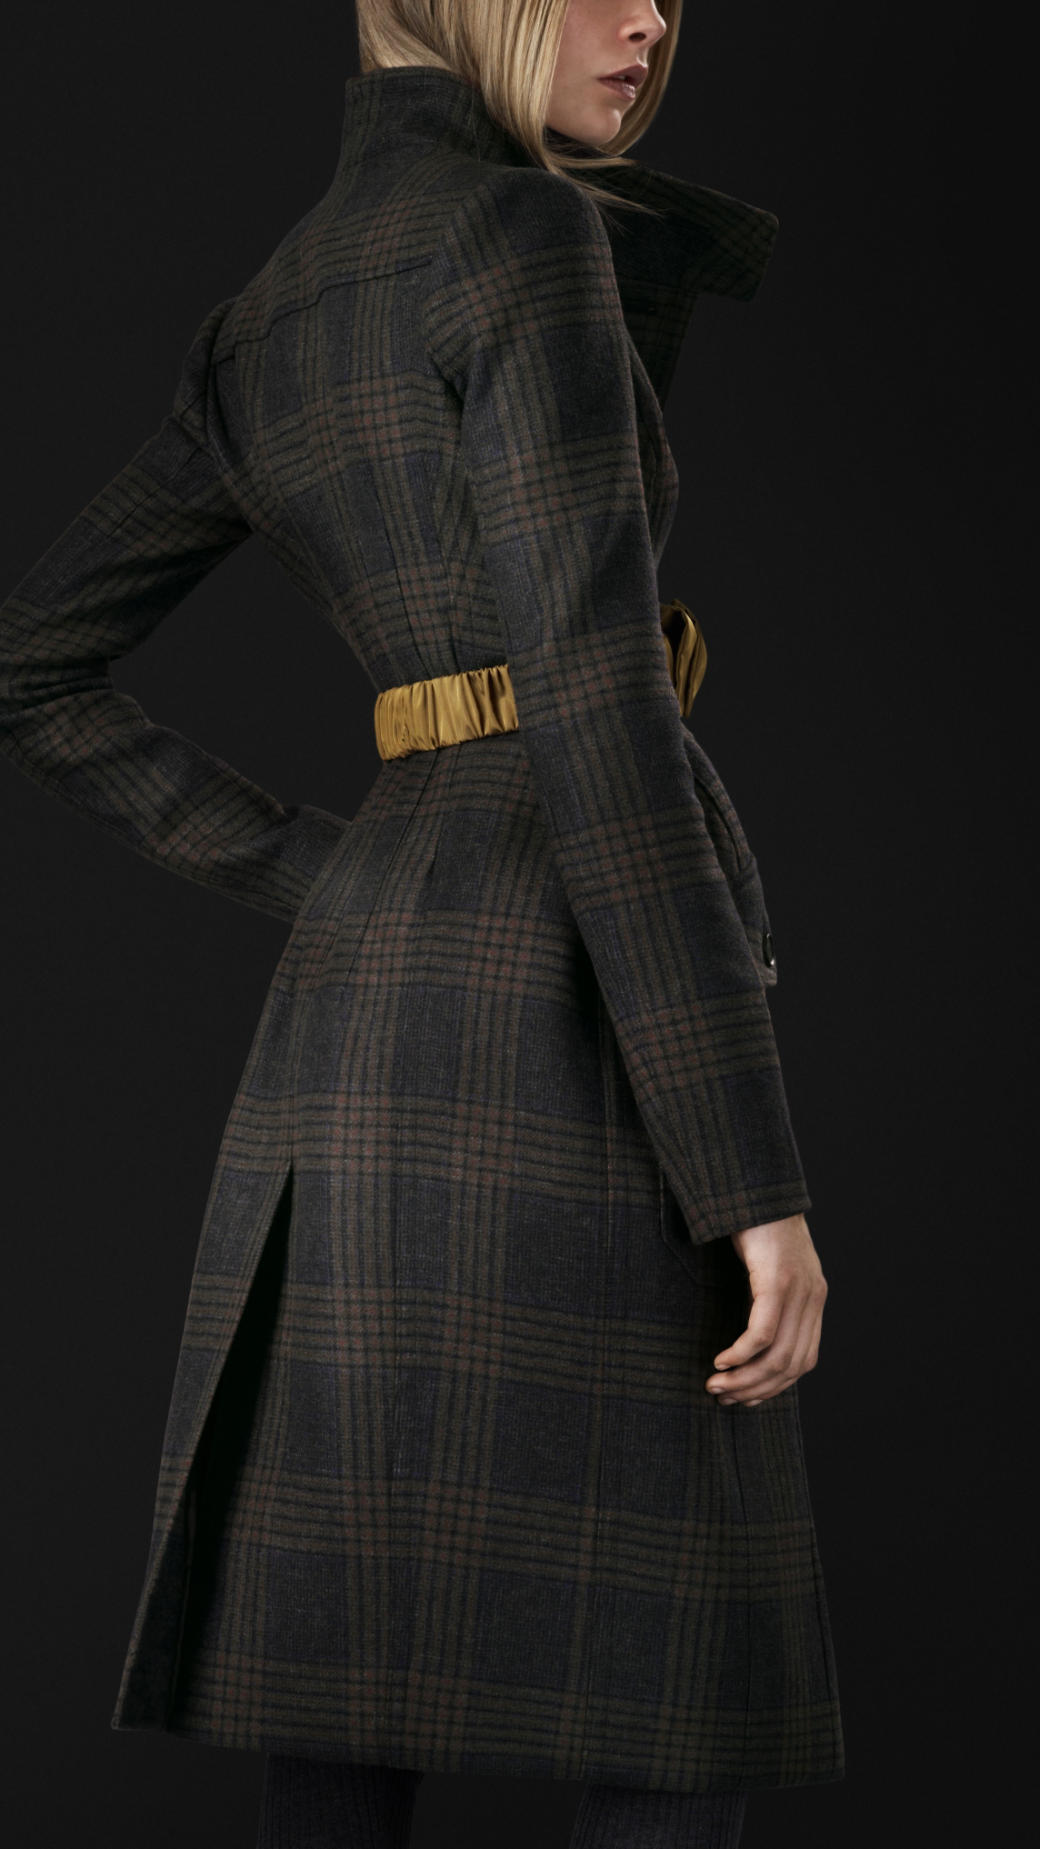 Lyst - Burberry Prorsum Wool Tailored Top Coat in Gray